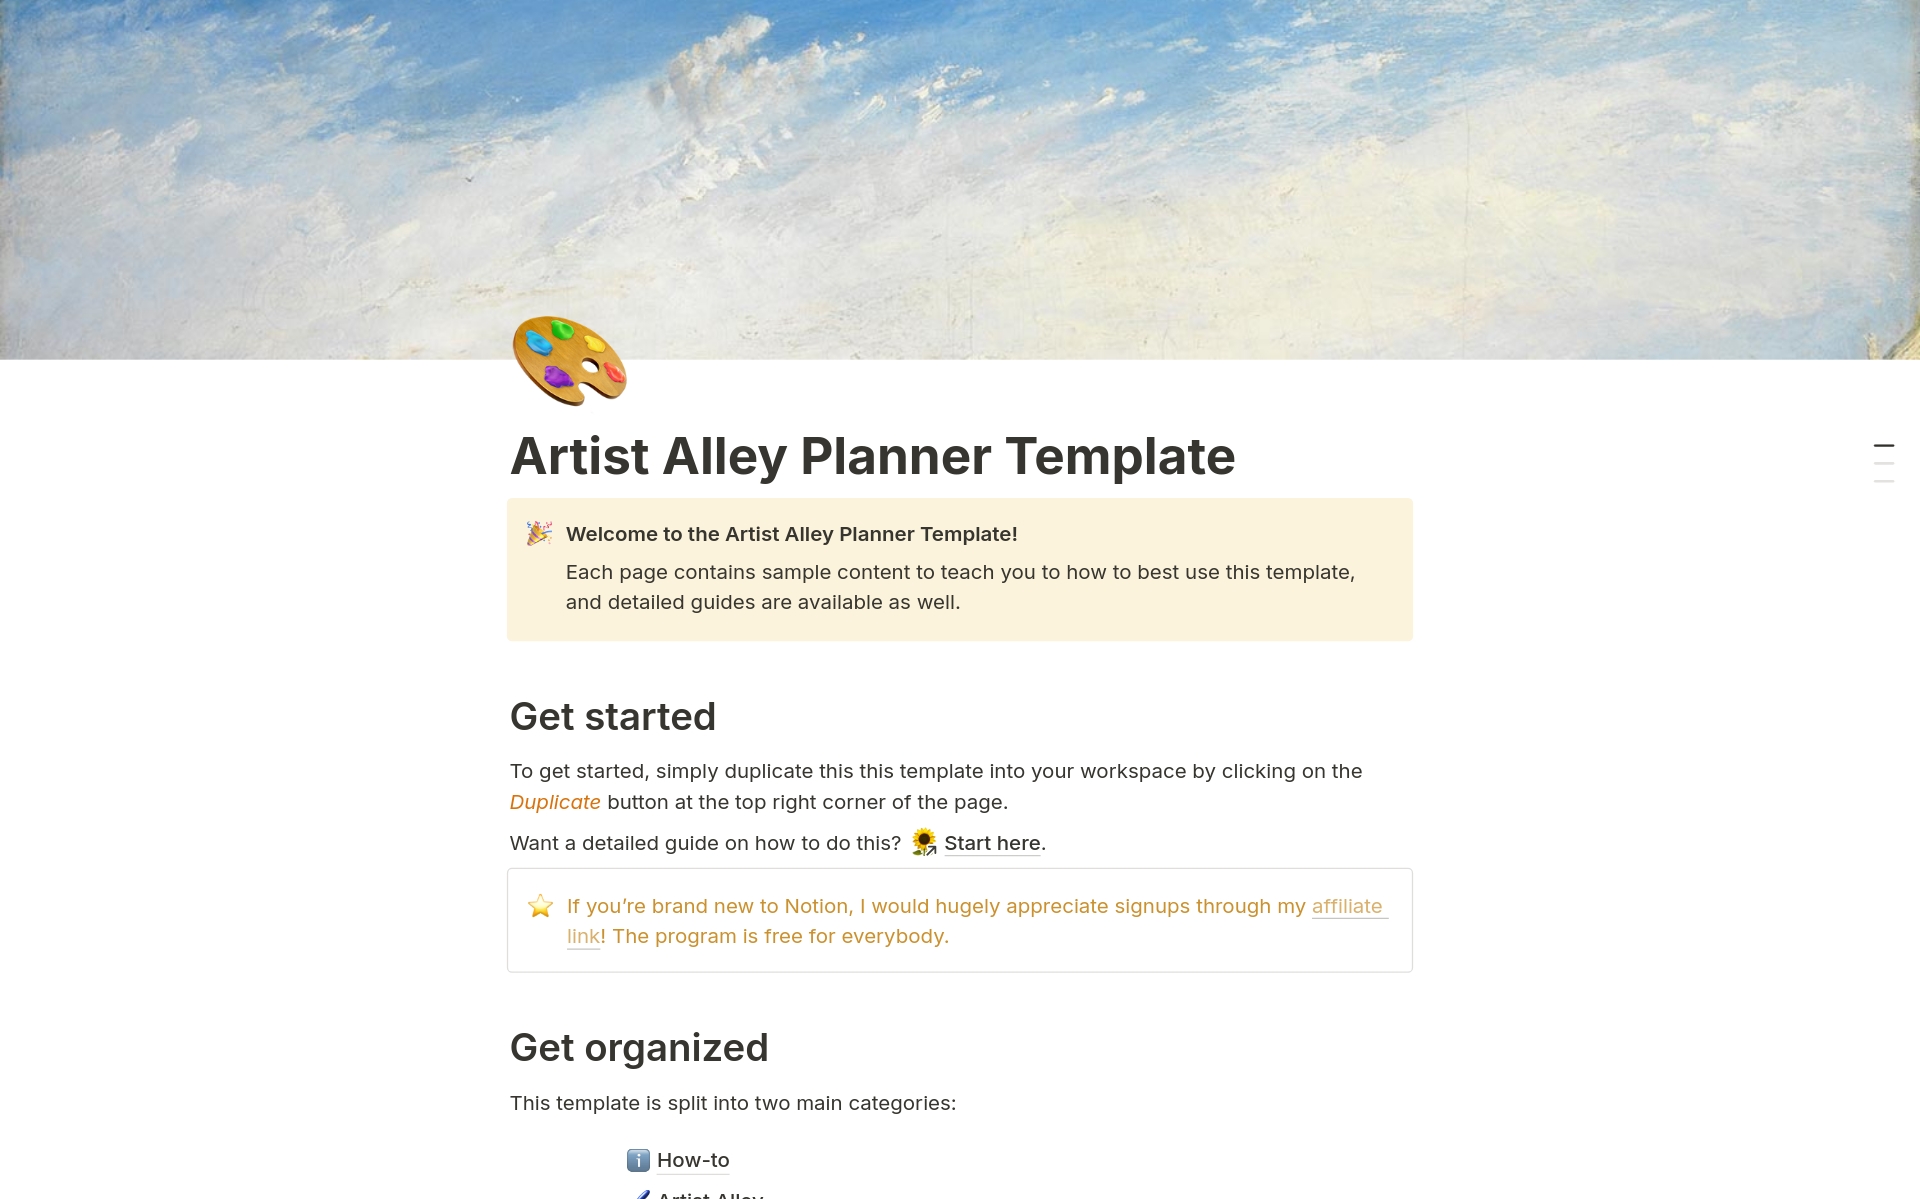 A free, all-in-one template for artists to plan, organize, and track everything related to vending at upcoming events. Production calendars, expense calculators, and detailed event preparation lists included.